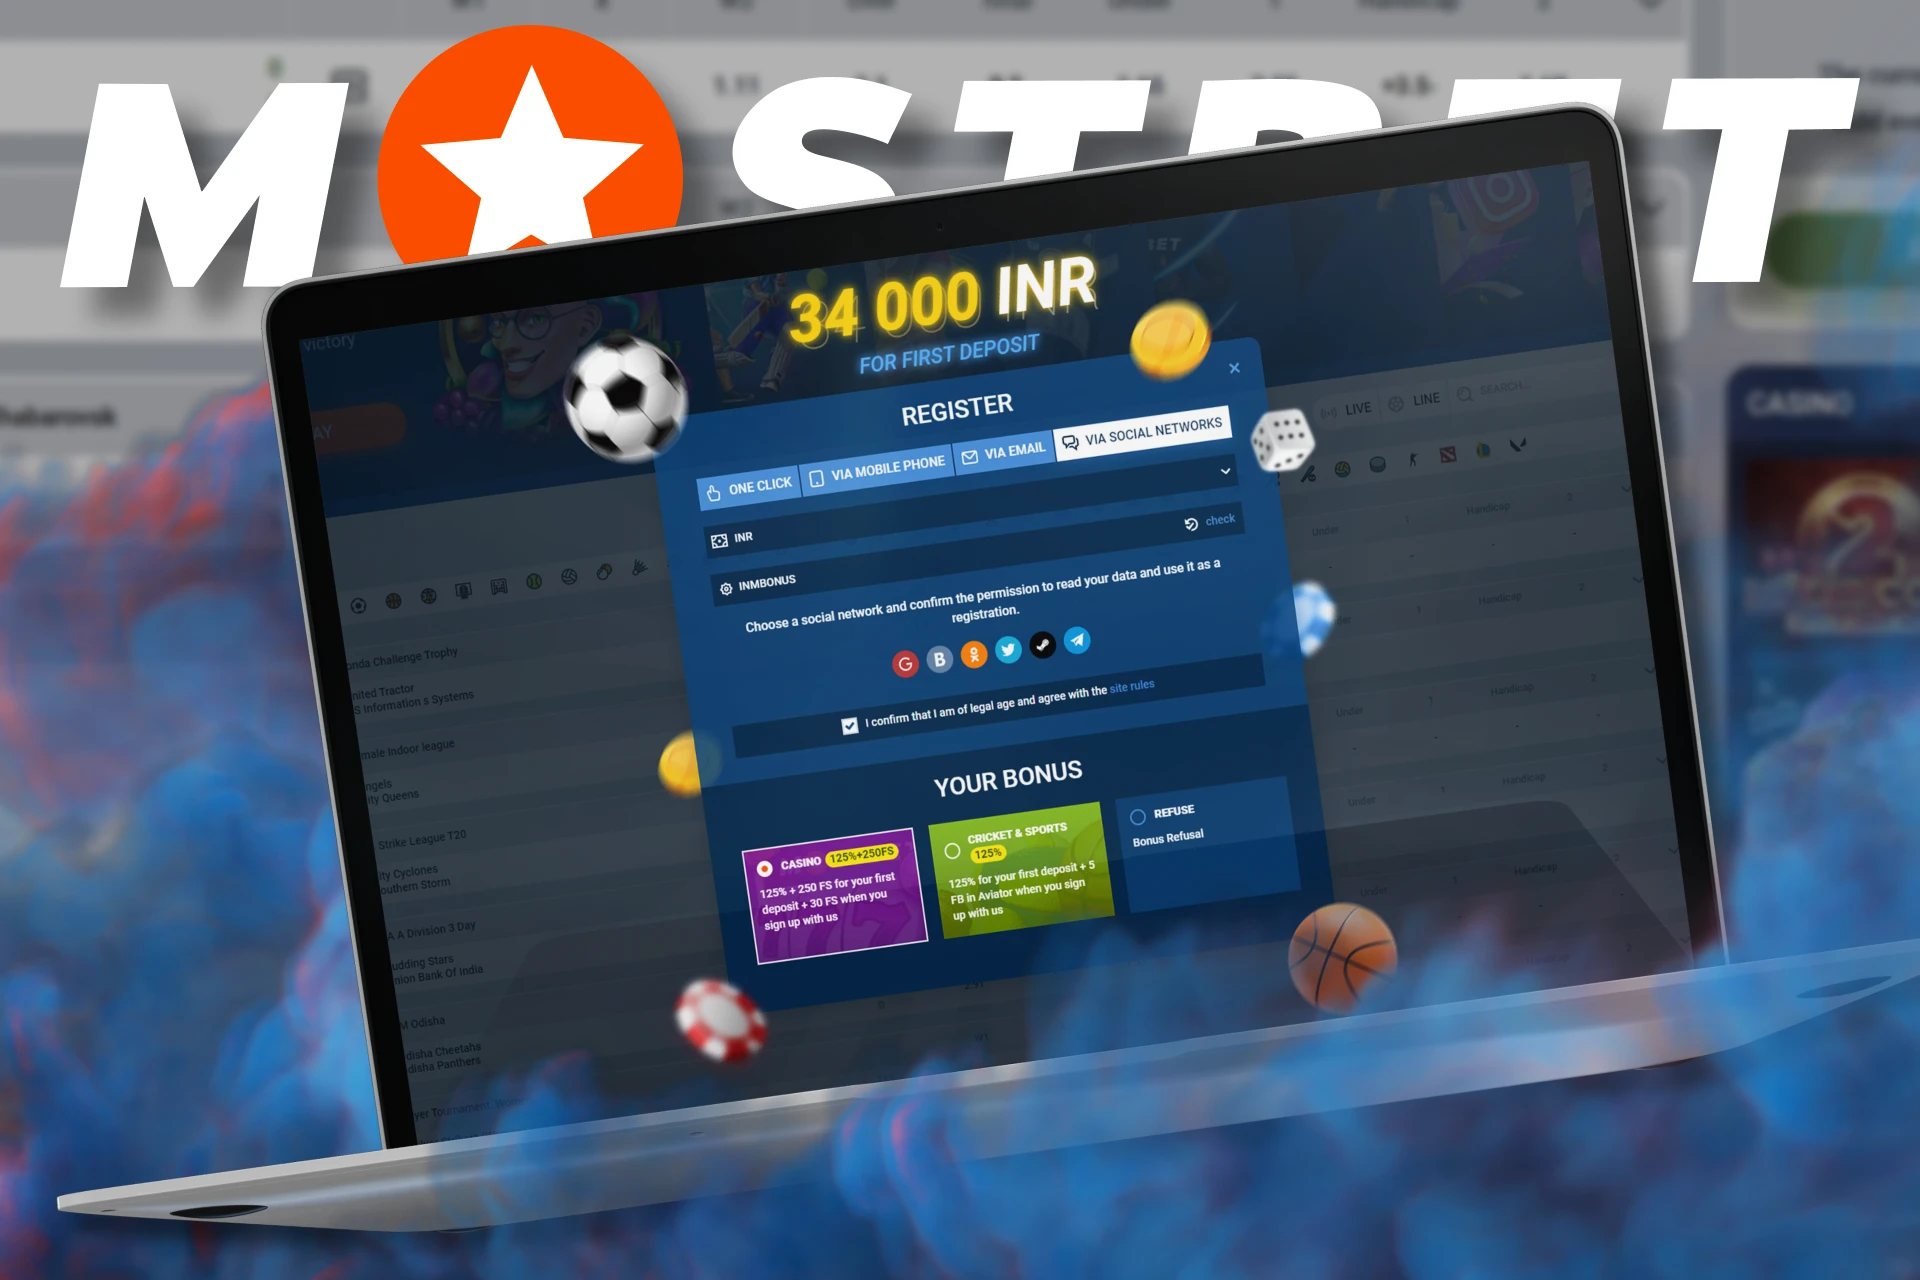 Use social networks and messengers to register at Mostbet.